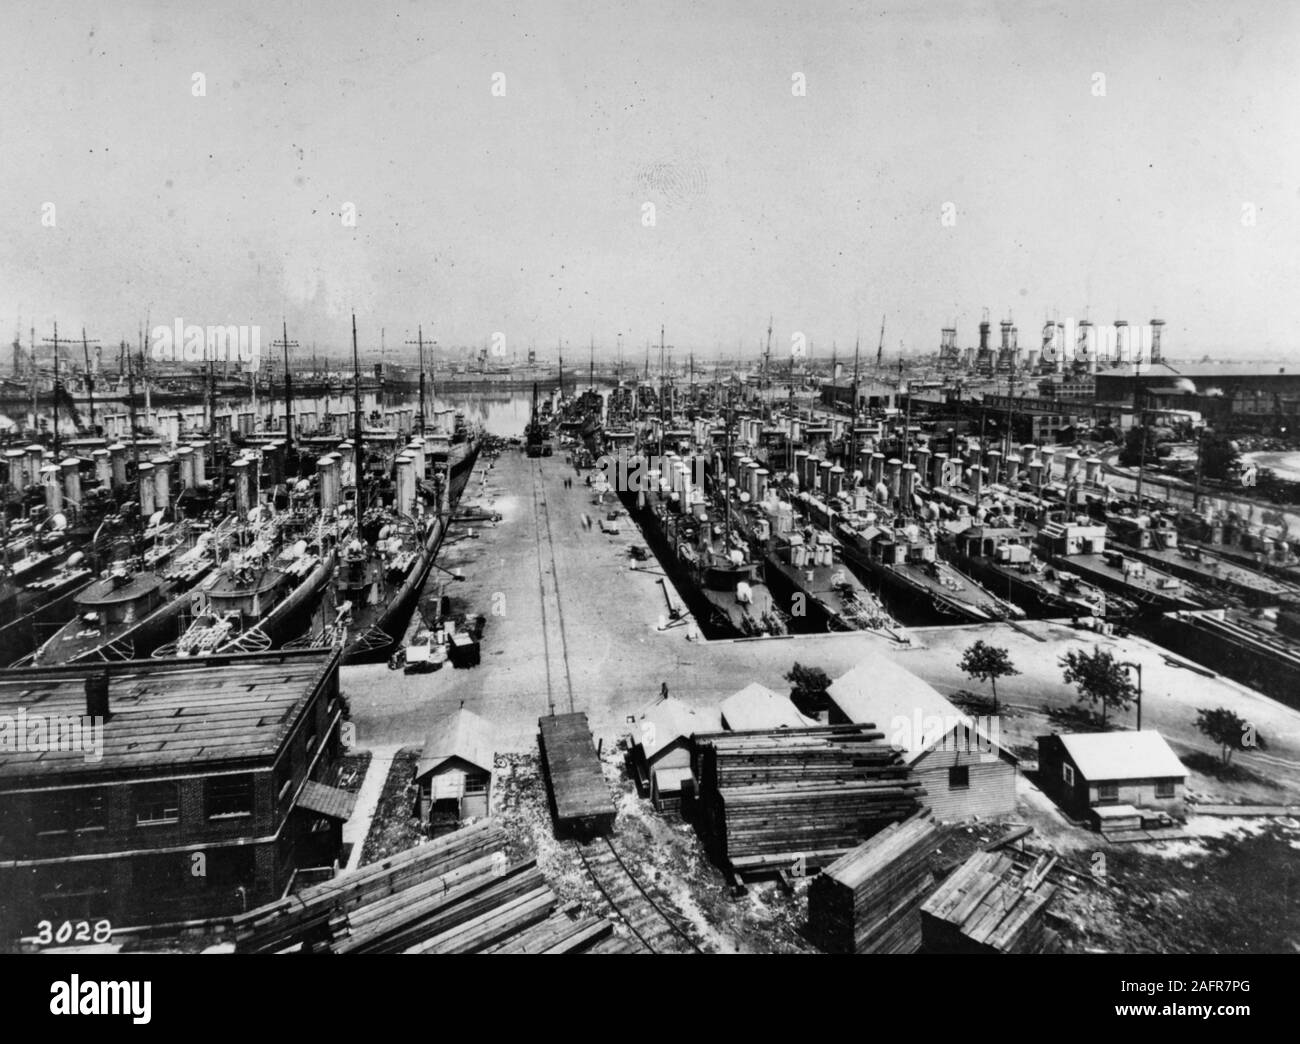 Destroyers mothballed -  View of part of 128 destroyers that saw action in World War I in storage at the Philadelphia Navy Yard, 18 October 1923. Note that the guns and other vital parts that are exposed to the weather are covered with grease so that the ships could be ready for service at a moment's notice. Stock Photo